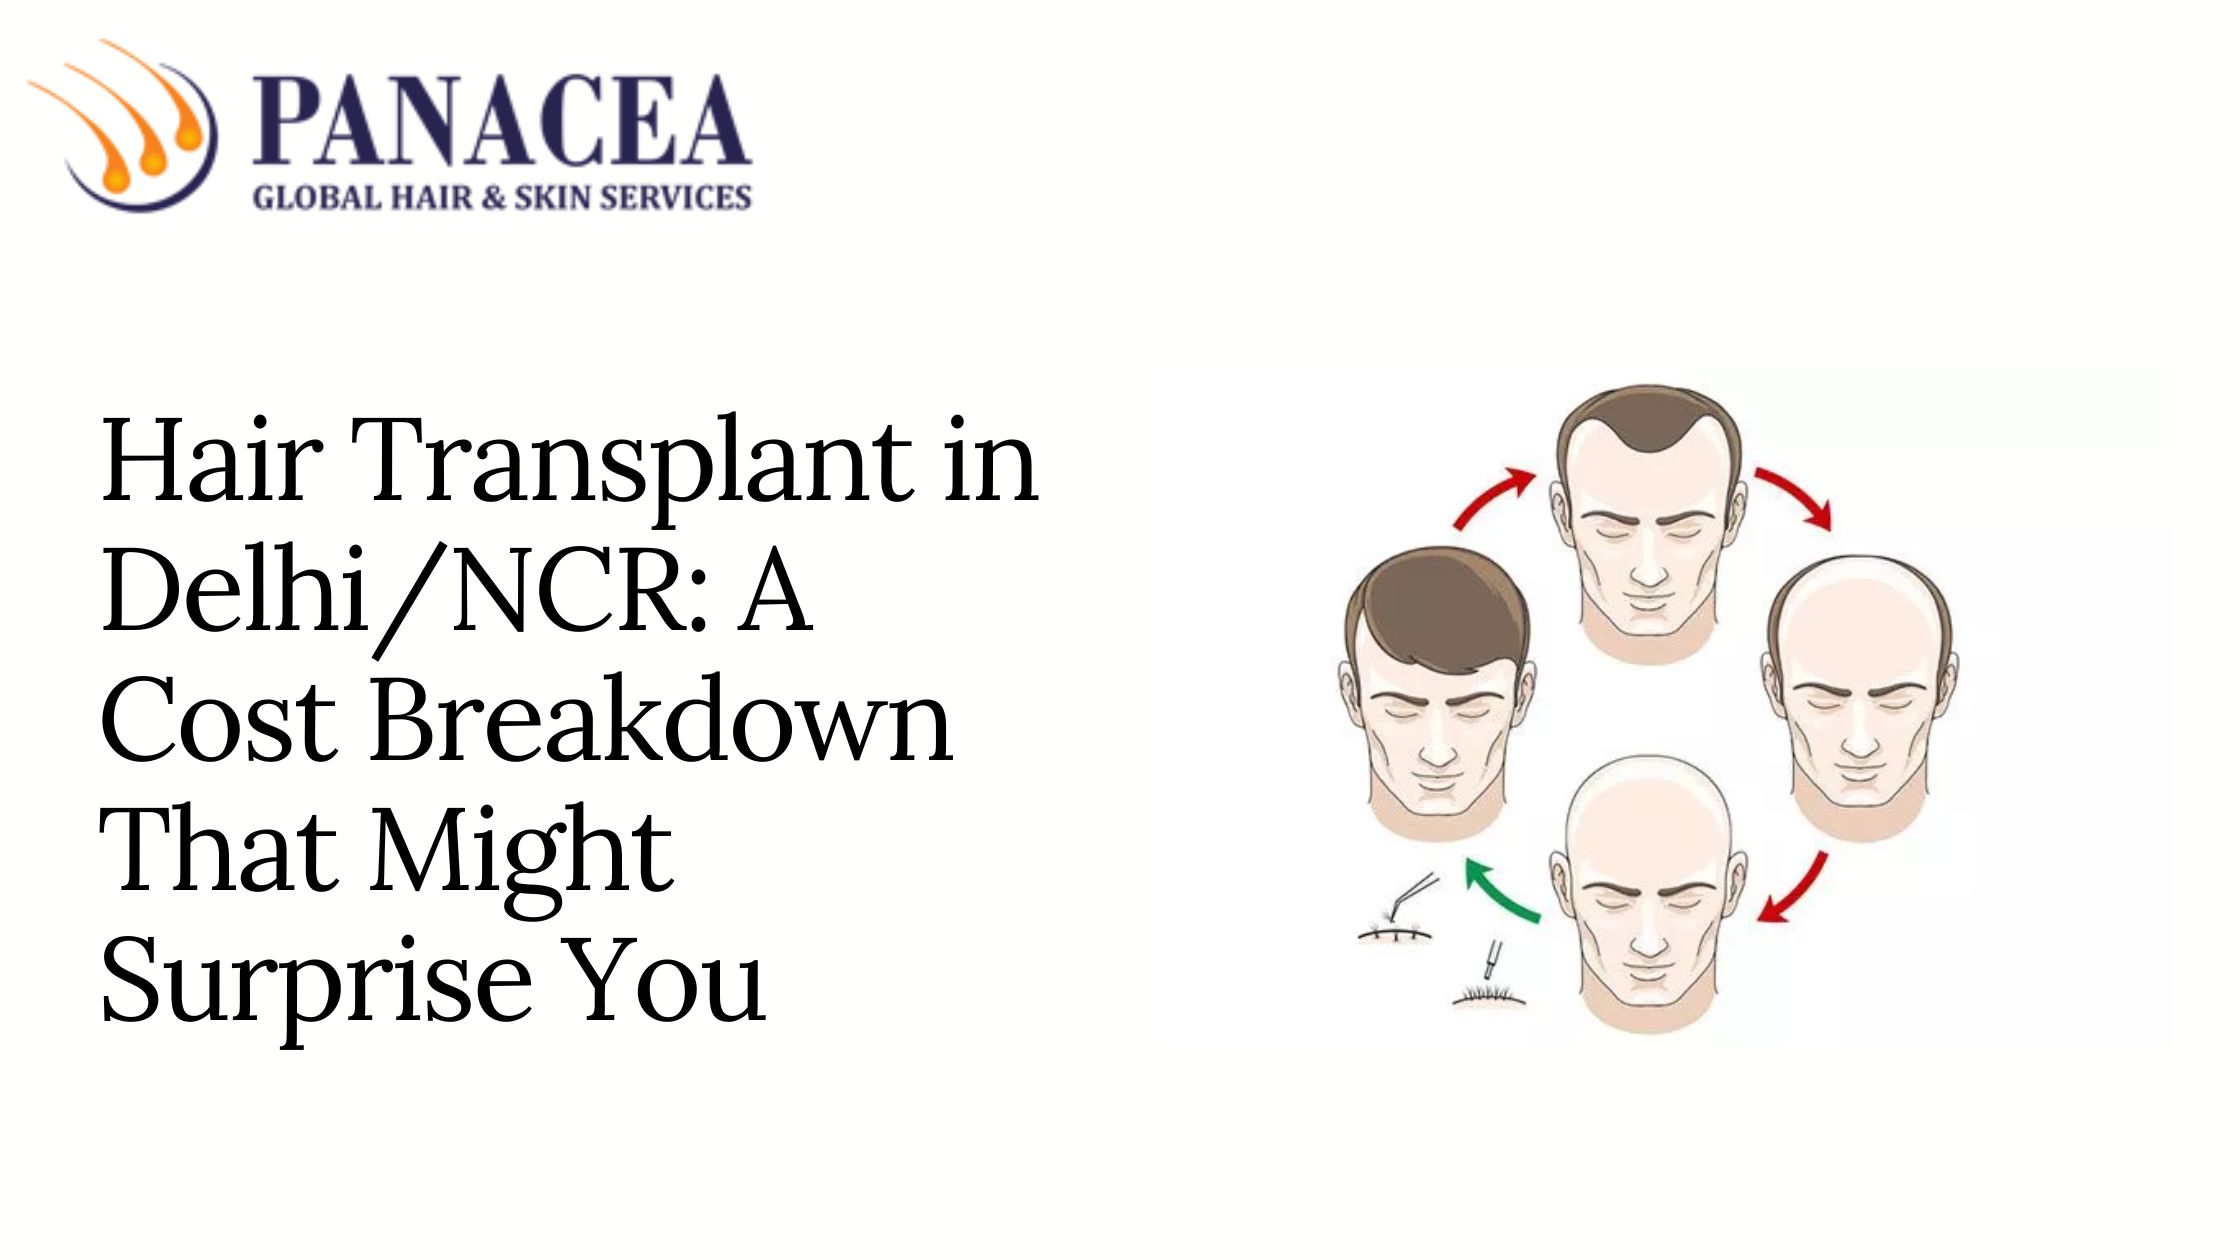 Hair Transplant in Delhi/NCR: A Cost Breakdown That Might Surprise You